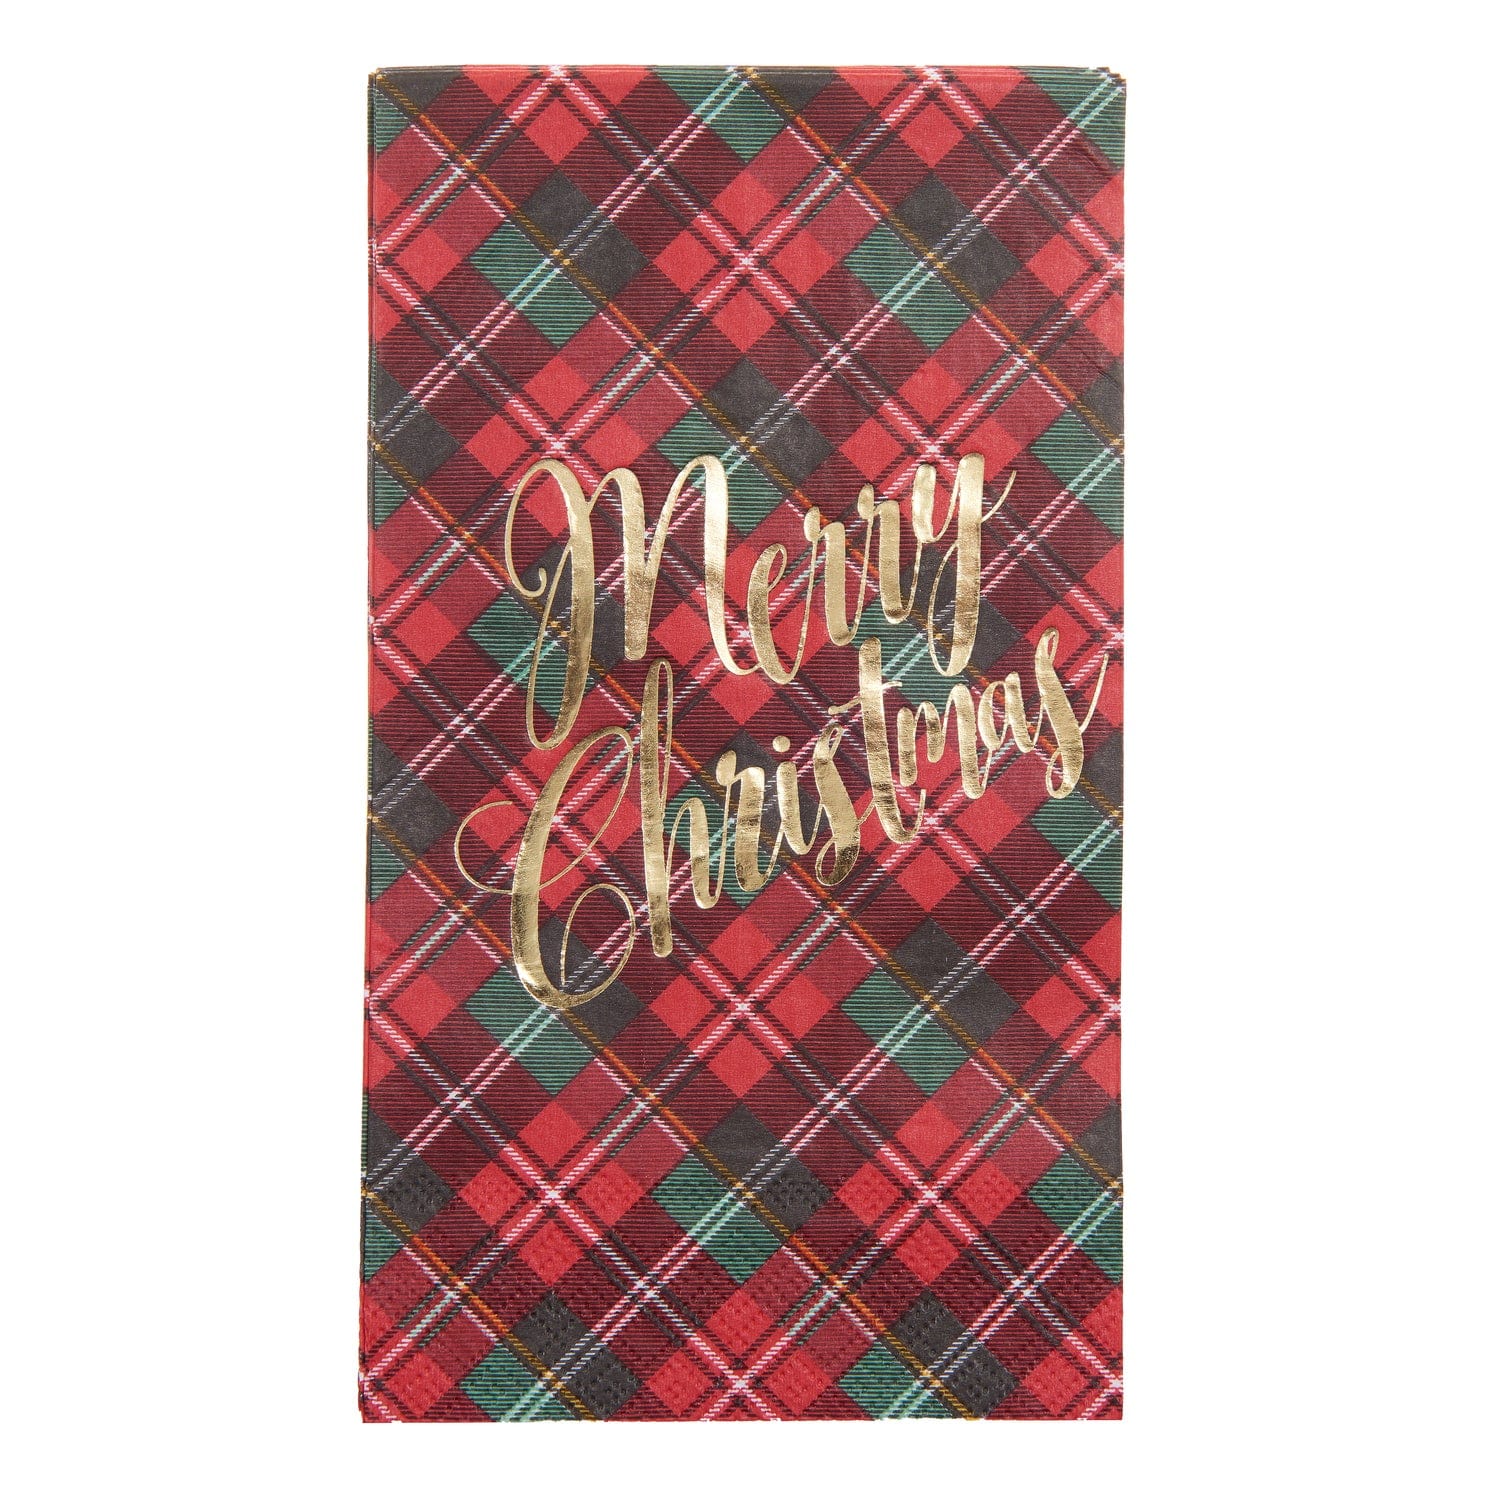 Red and Green Plaid Christmas Scatter Rug